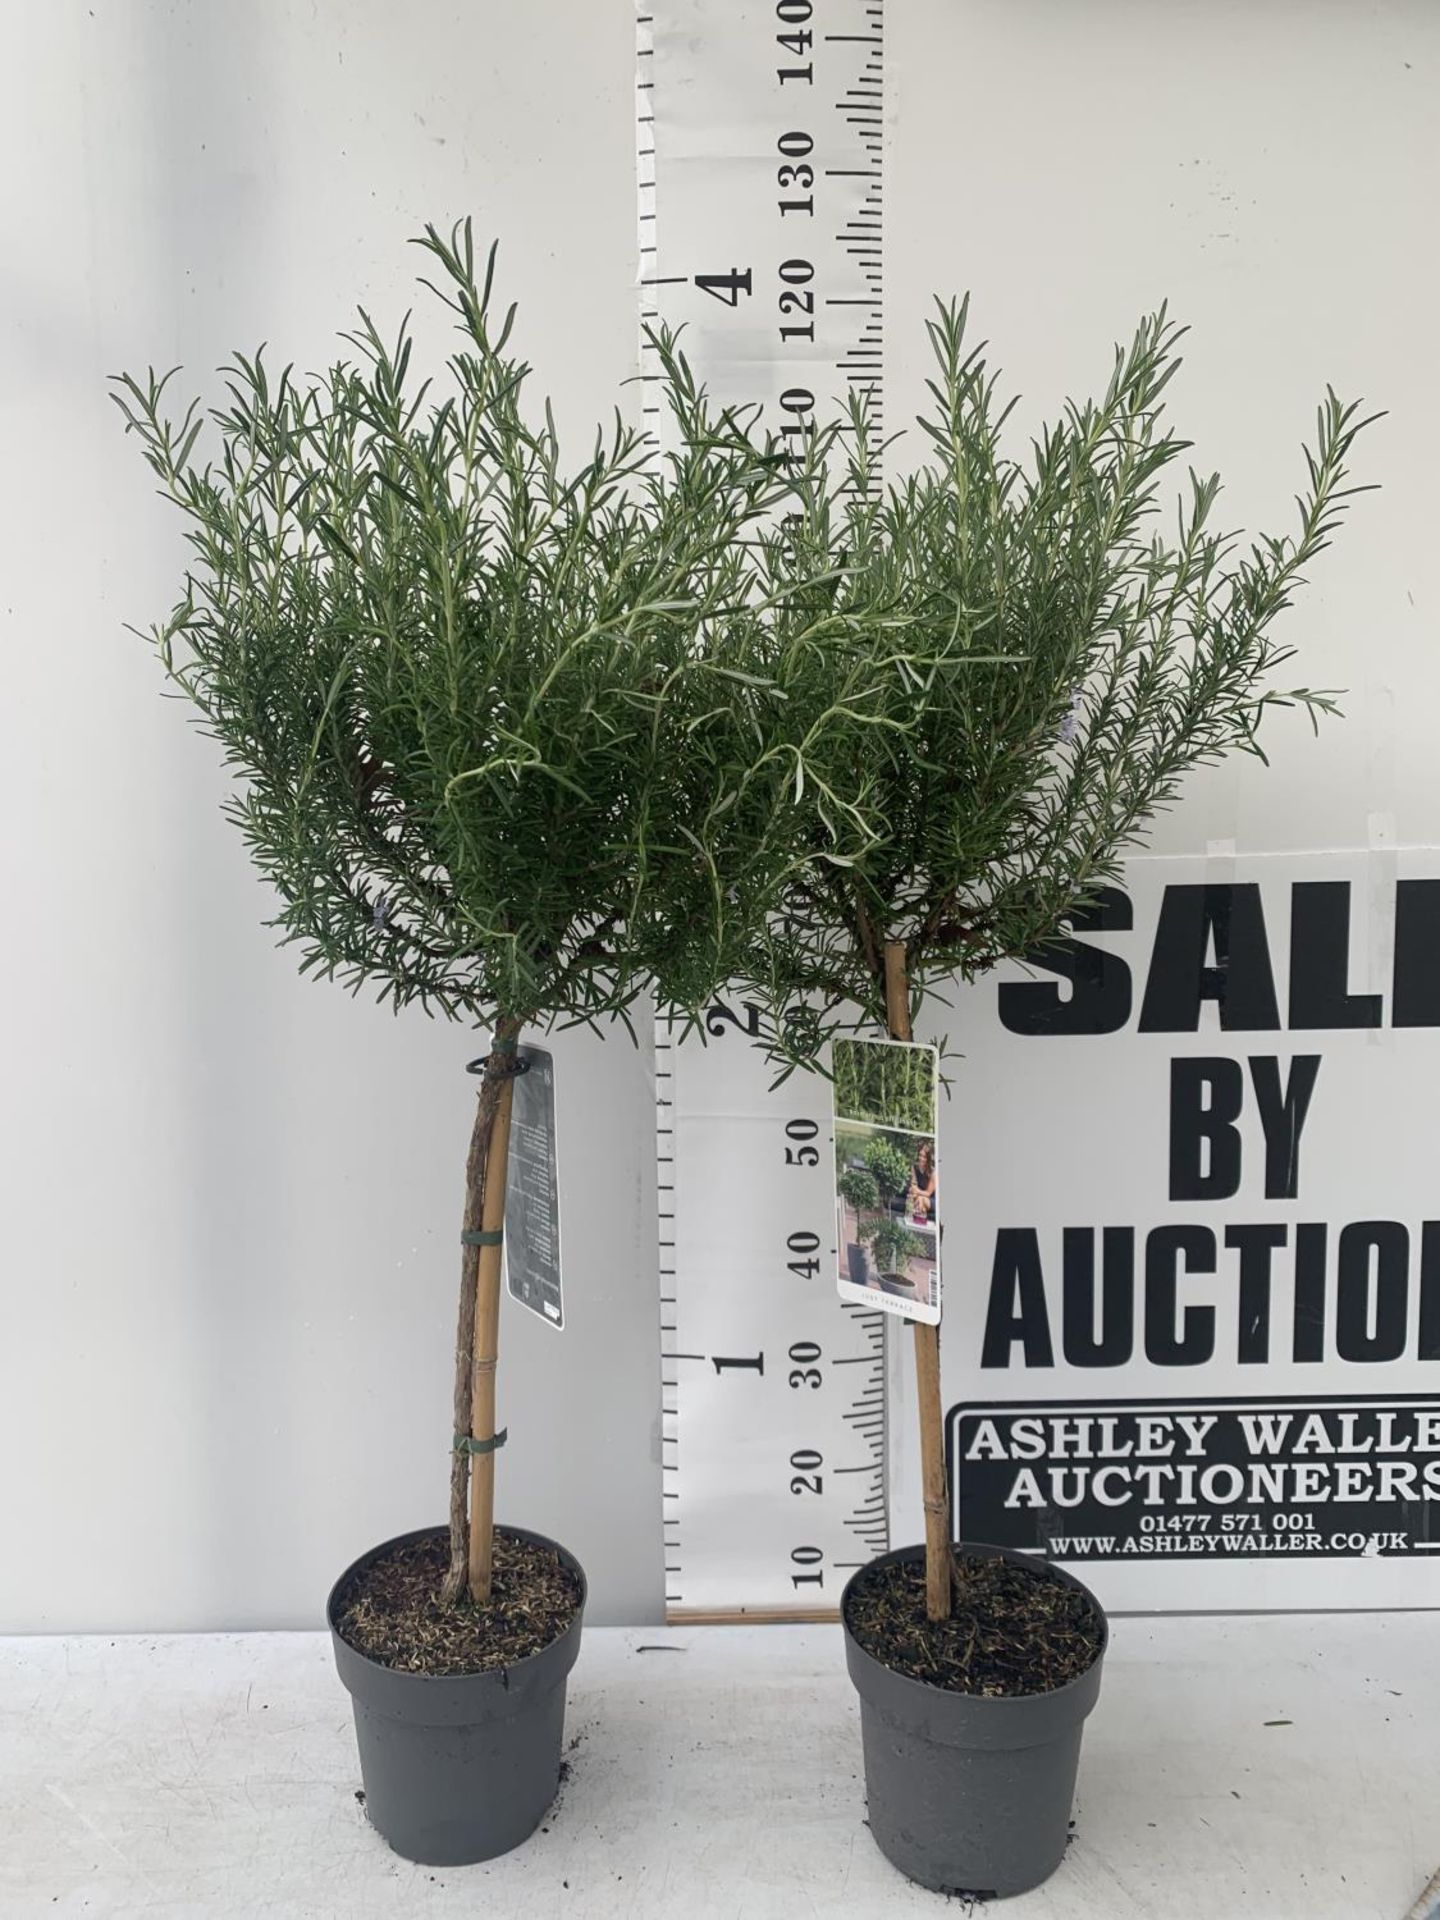 TWO ROSEMARY OFFICINALIS STANDARD TREES APPROX 120CM IN HEIGHT IN 3LTR POTS NO VAT TO BE SOLD FOR